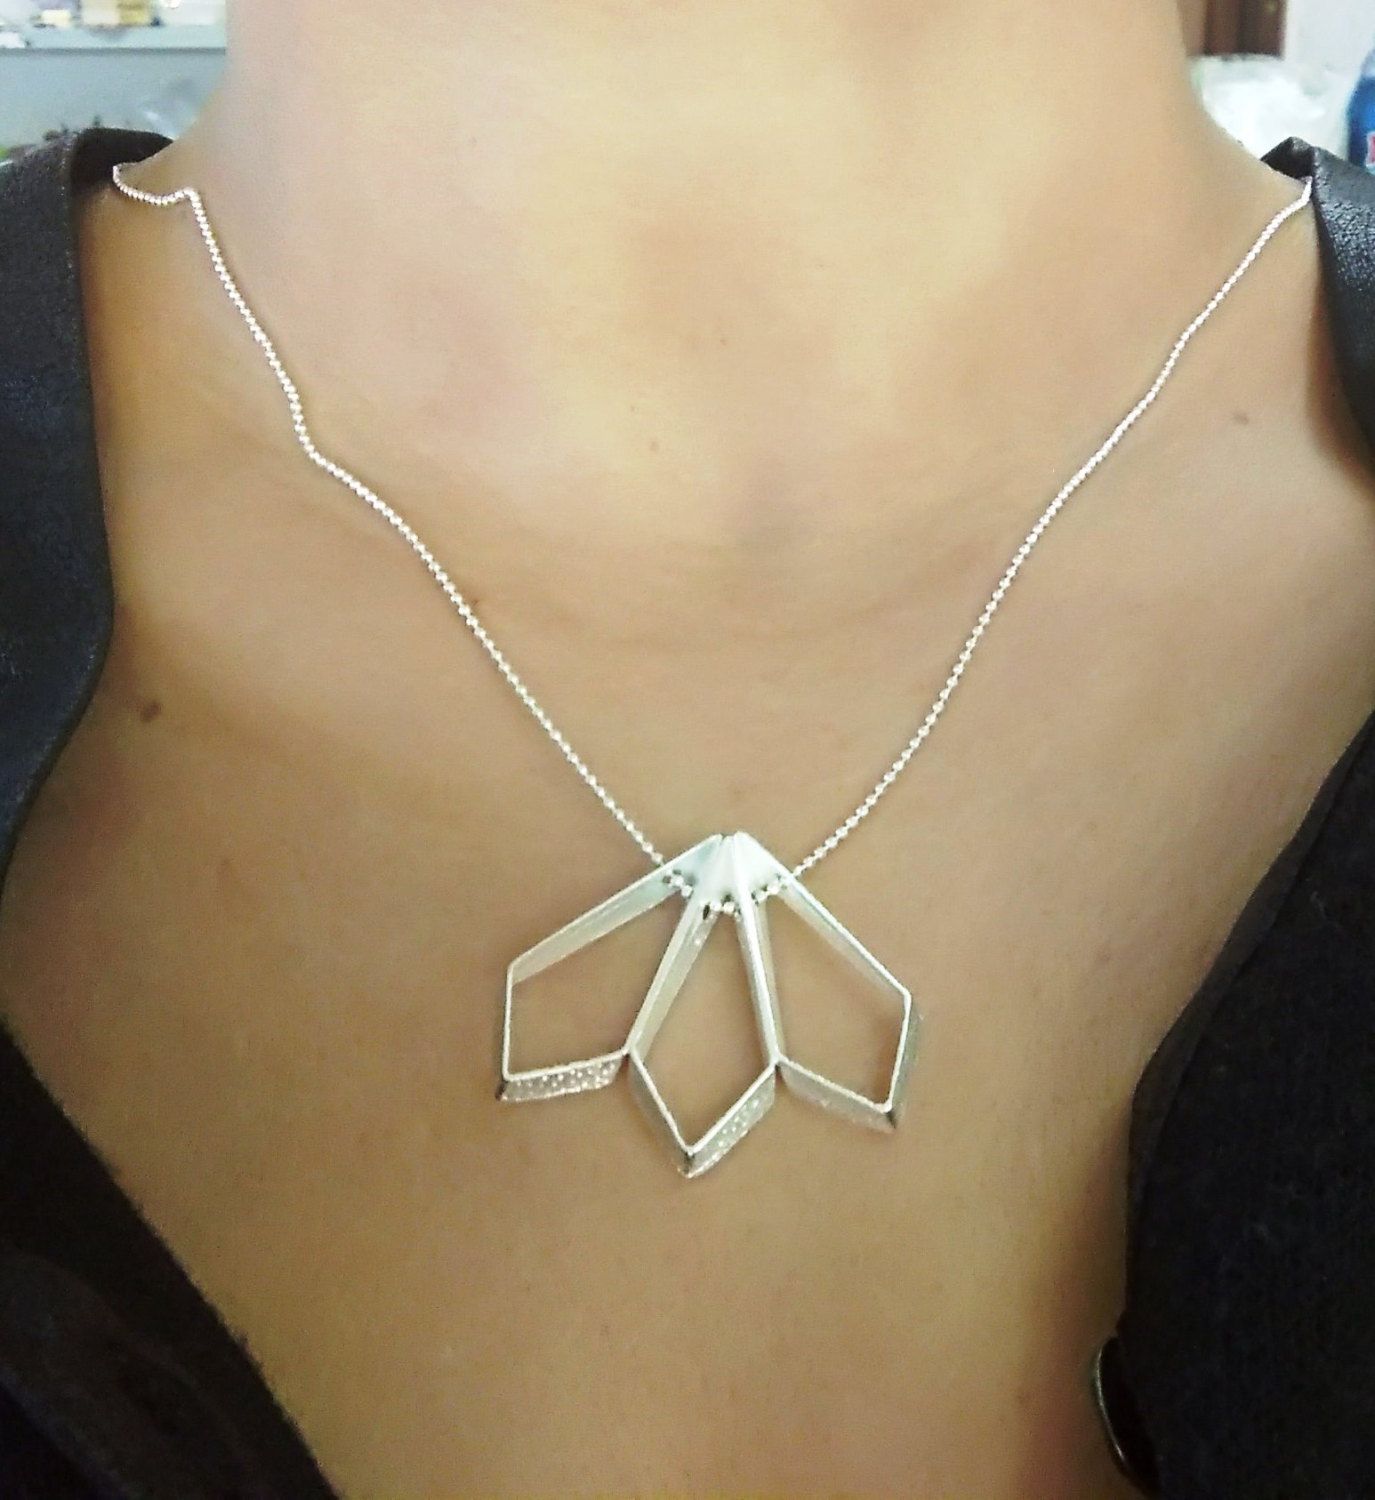 Geometric Necklace, Silver Necklace, Designer Jewelry, Chain With Straight  Lines, Necklace With Triangle, Trendy Jewelry, Best Seller, Sale Intended For Most Popular Geometric Lines Necklaces (View 15 of 25)